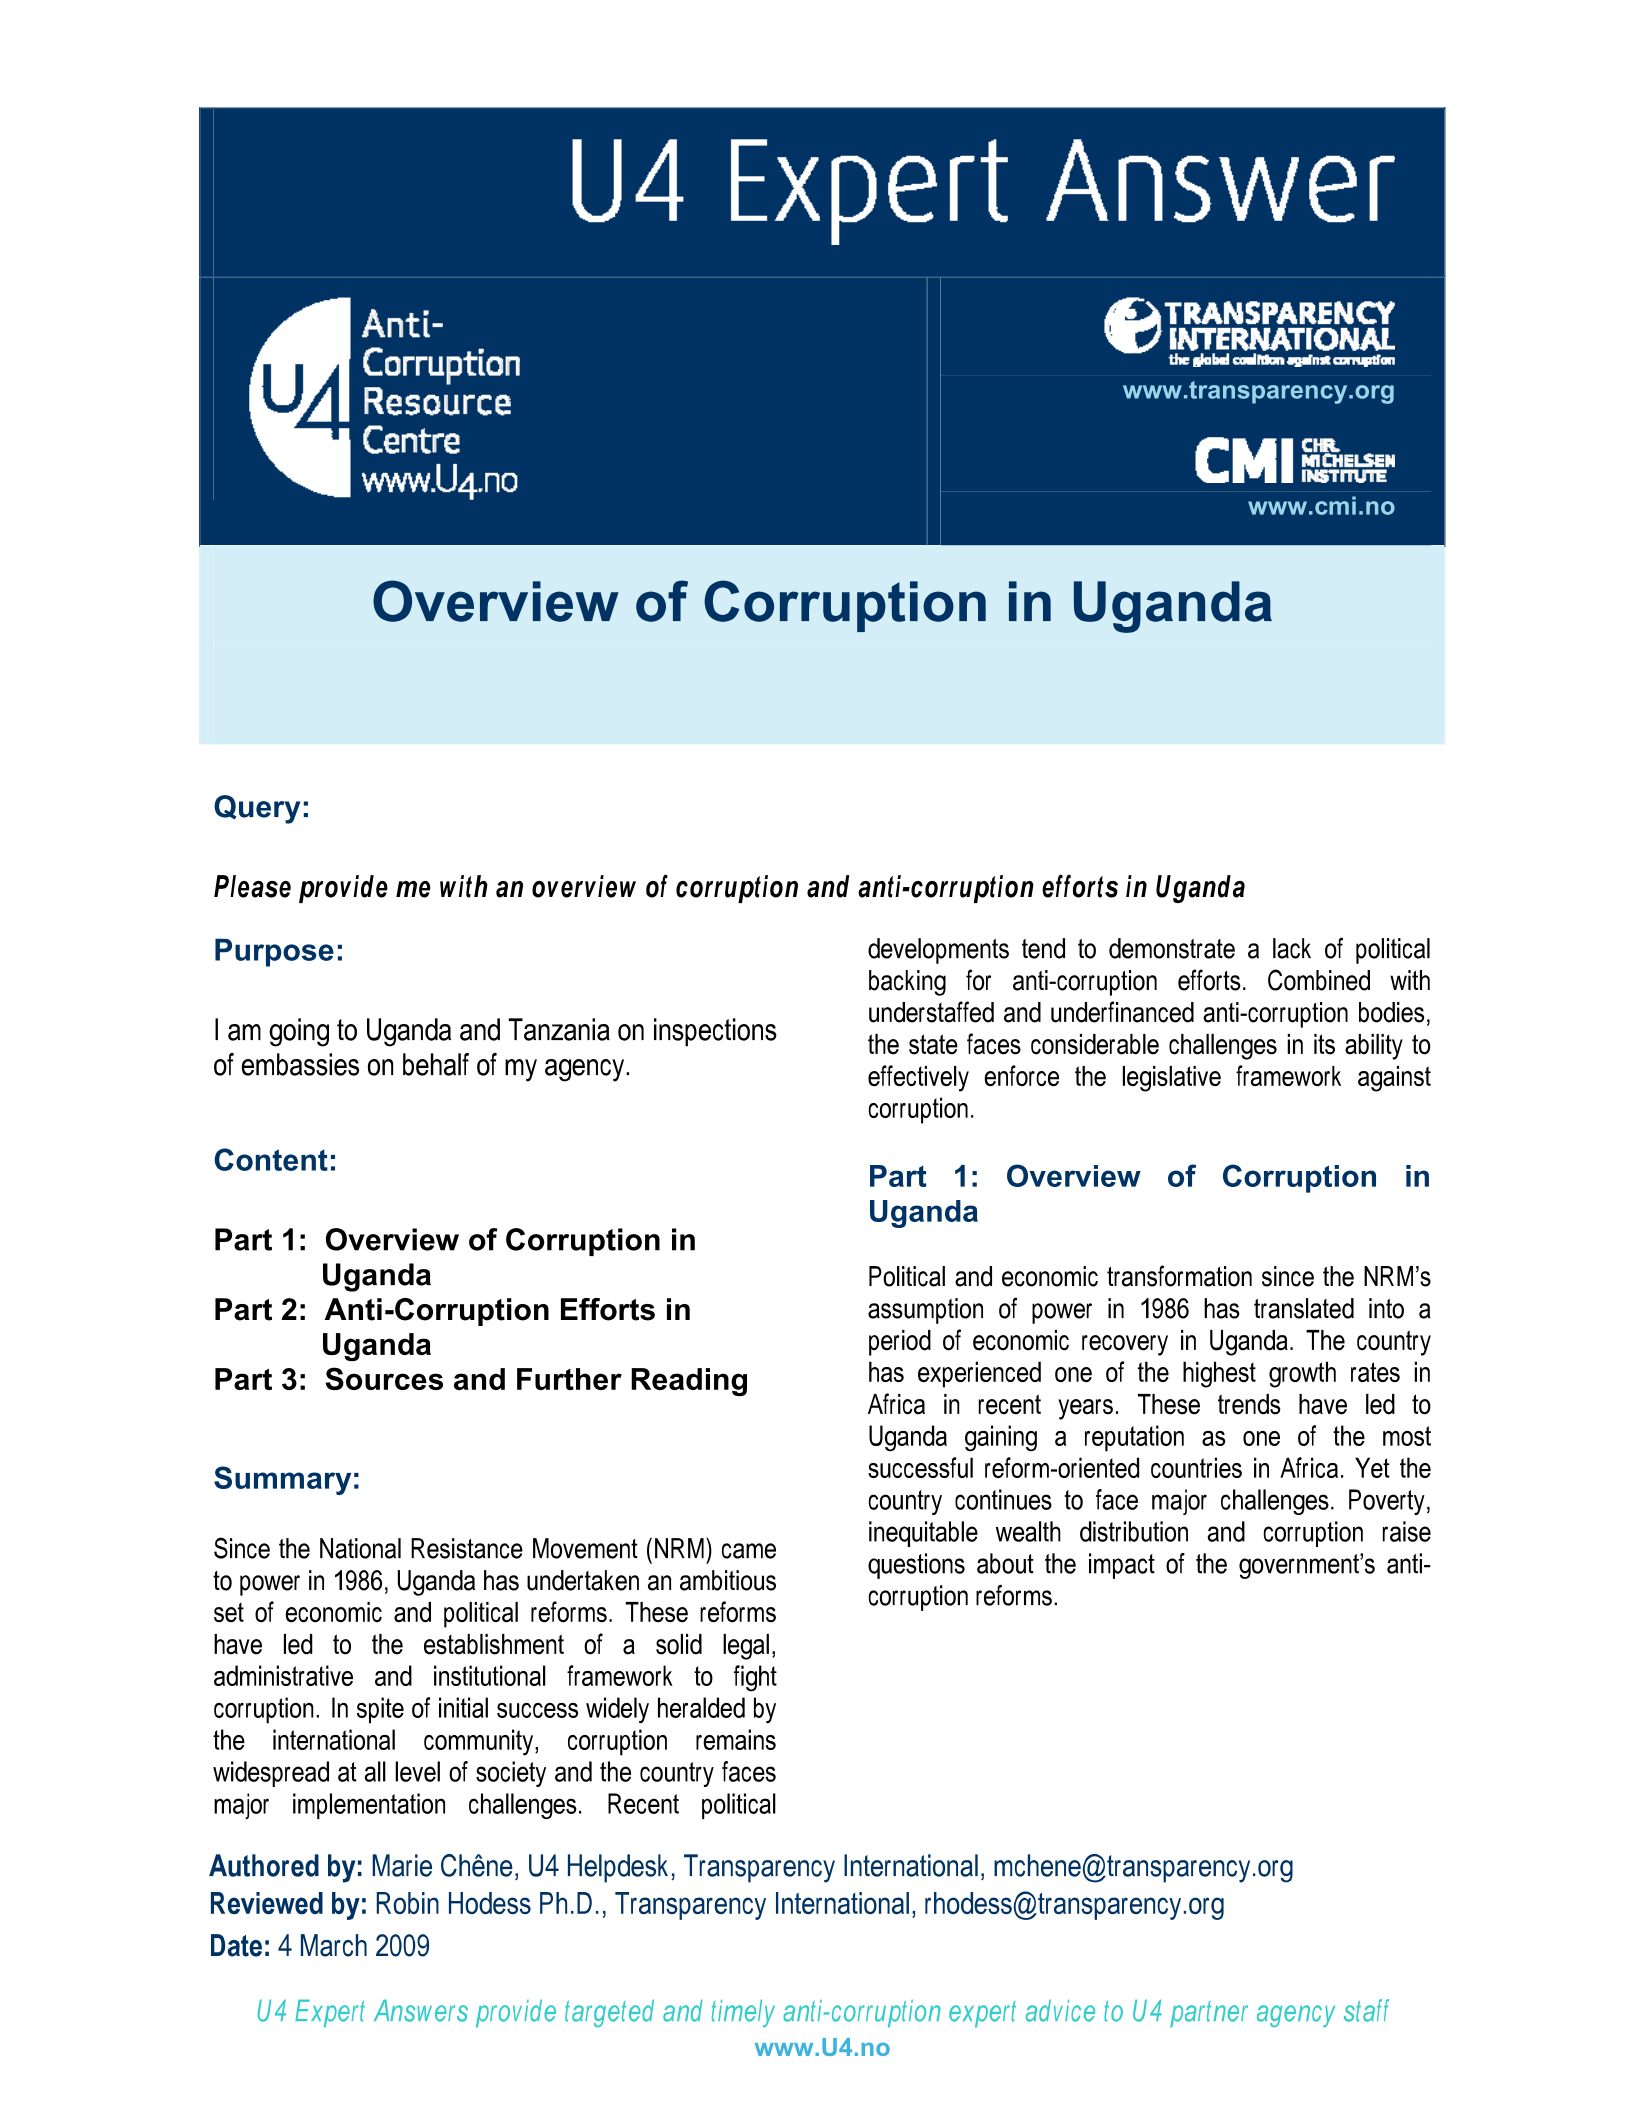 Overview of corruption in Uganda